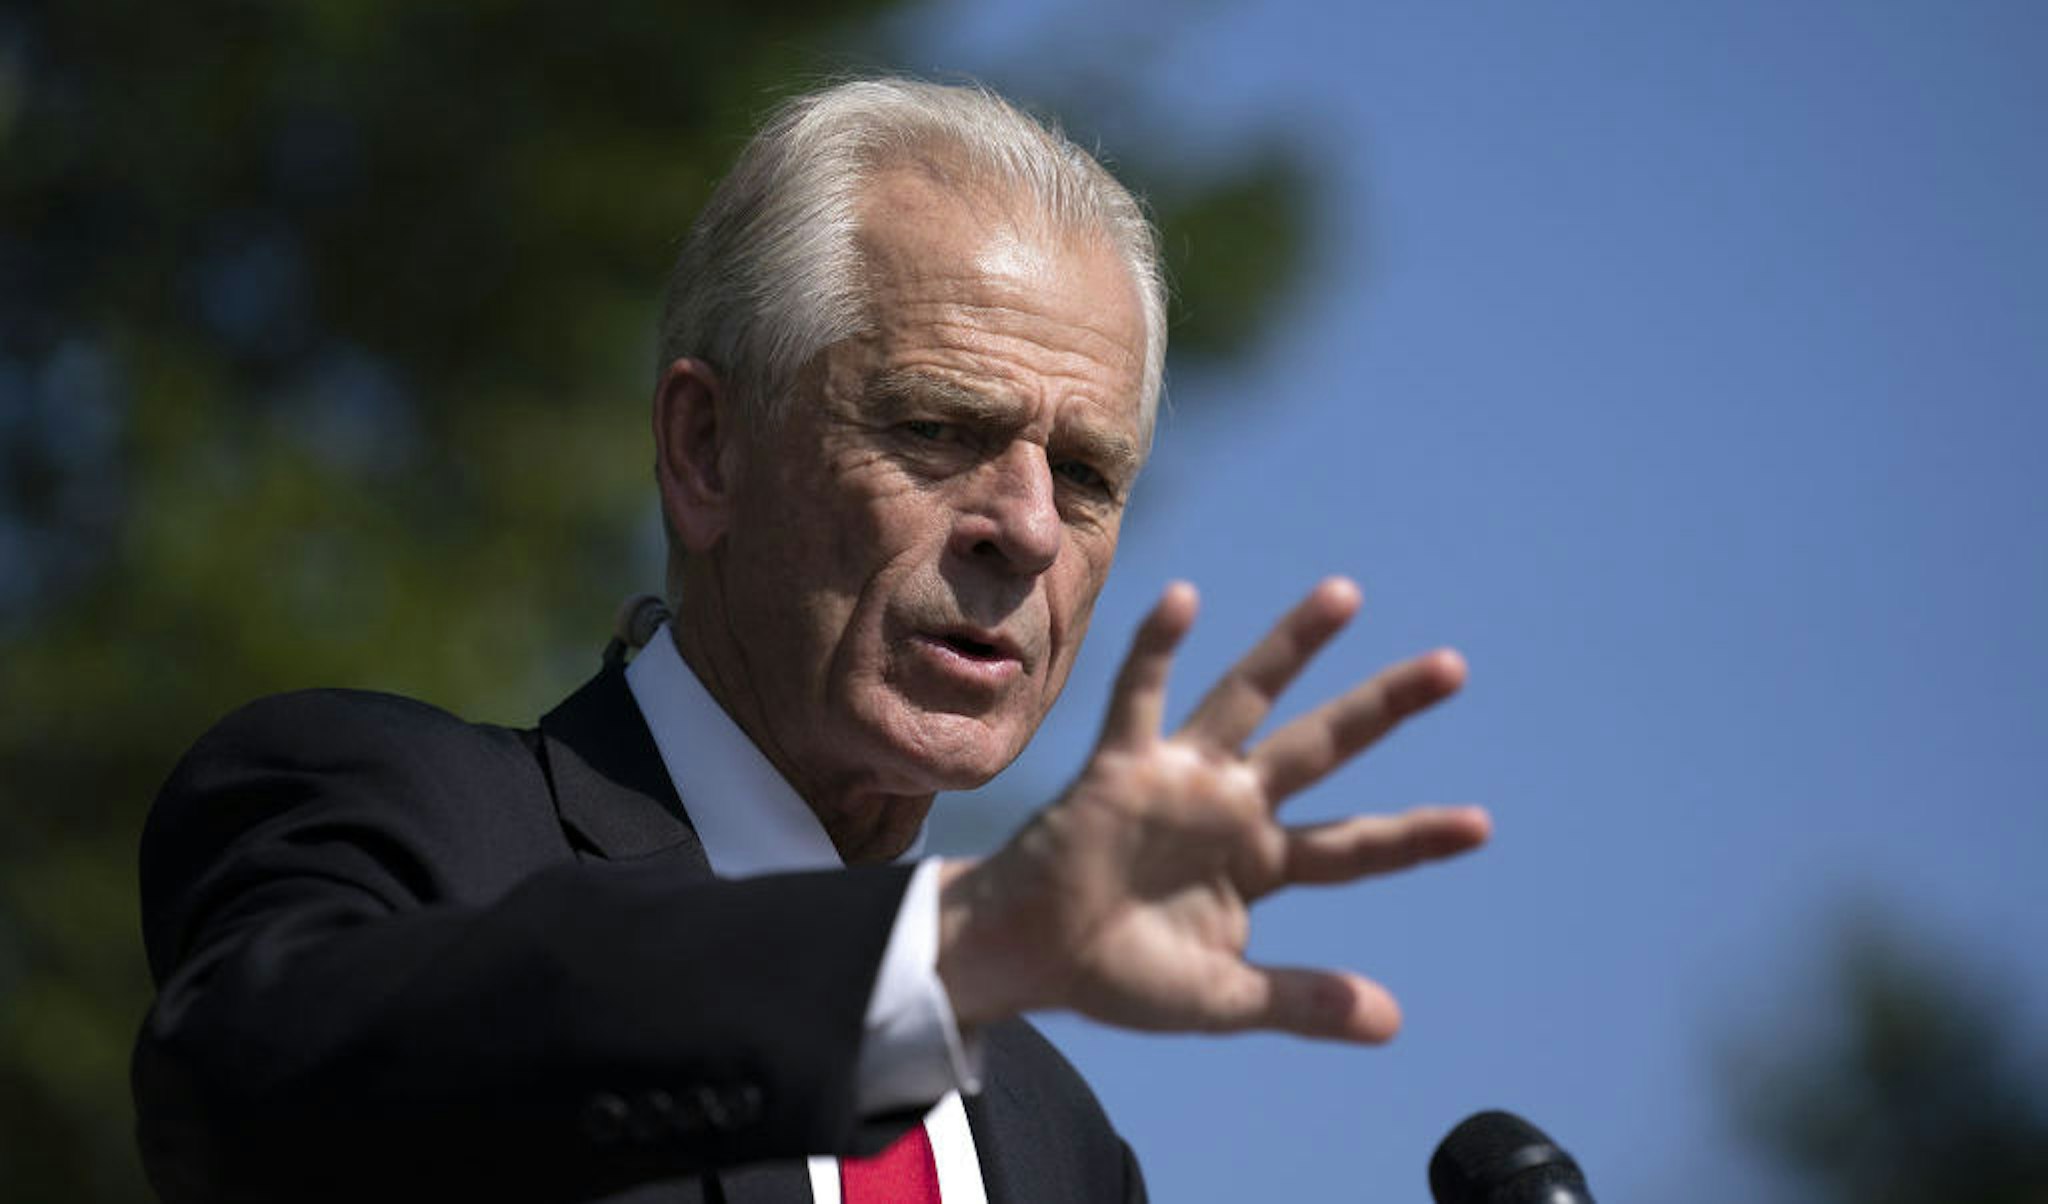 Peter Navarro, director of the National Trade Council, speaks to members of the media outside the White House in Washington, D.C., U.S., on Friday, Aug. 28, 2020. Navarro, who has come out against a potential sale to Microsoft and advocated banning TikTok completely, has been at odds with Treasury Secretary Steven Mnuchin, who wants the app sold, according to a person familiar with the deliberations within the White House. Navarro said there were “no tensions whatsoever” between himself and Mnuchin. Photographer: Stefani Reynolds/Sipa/Bloomberg